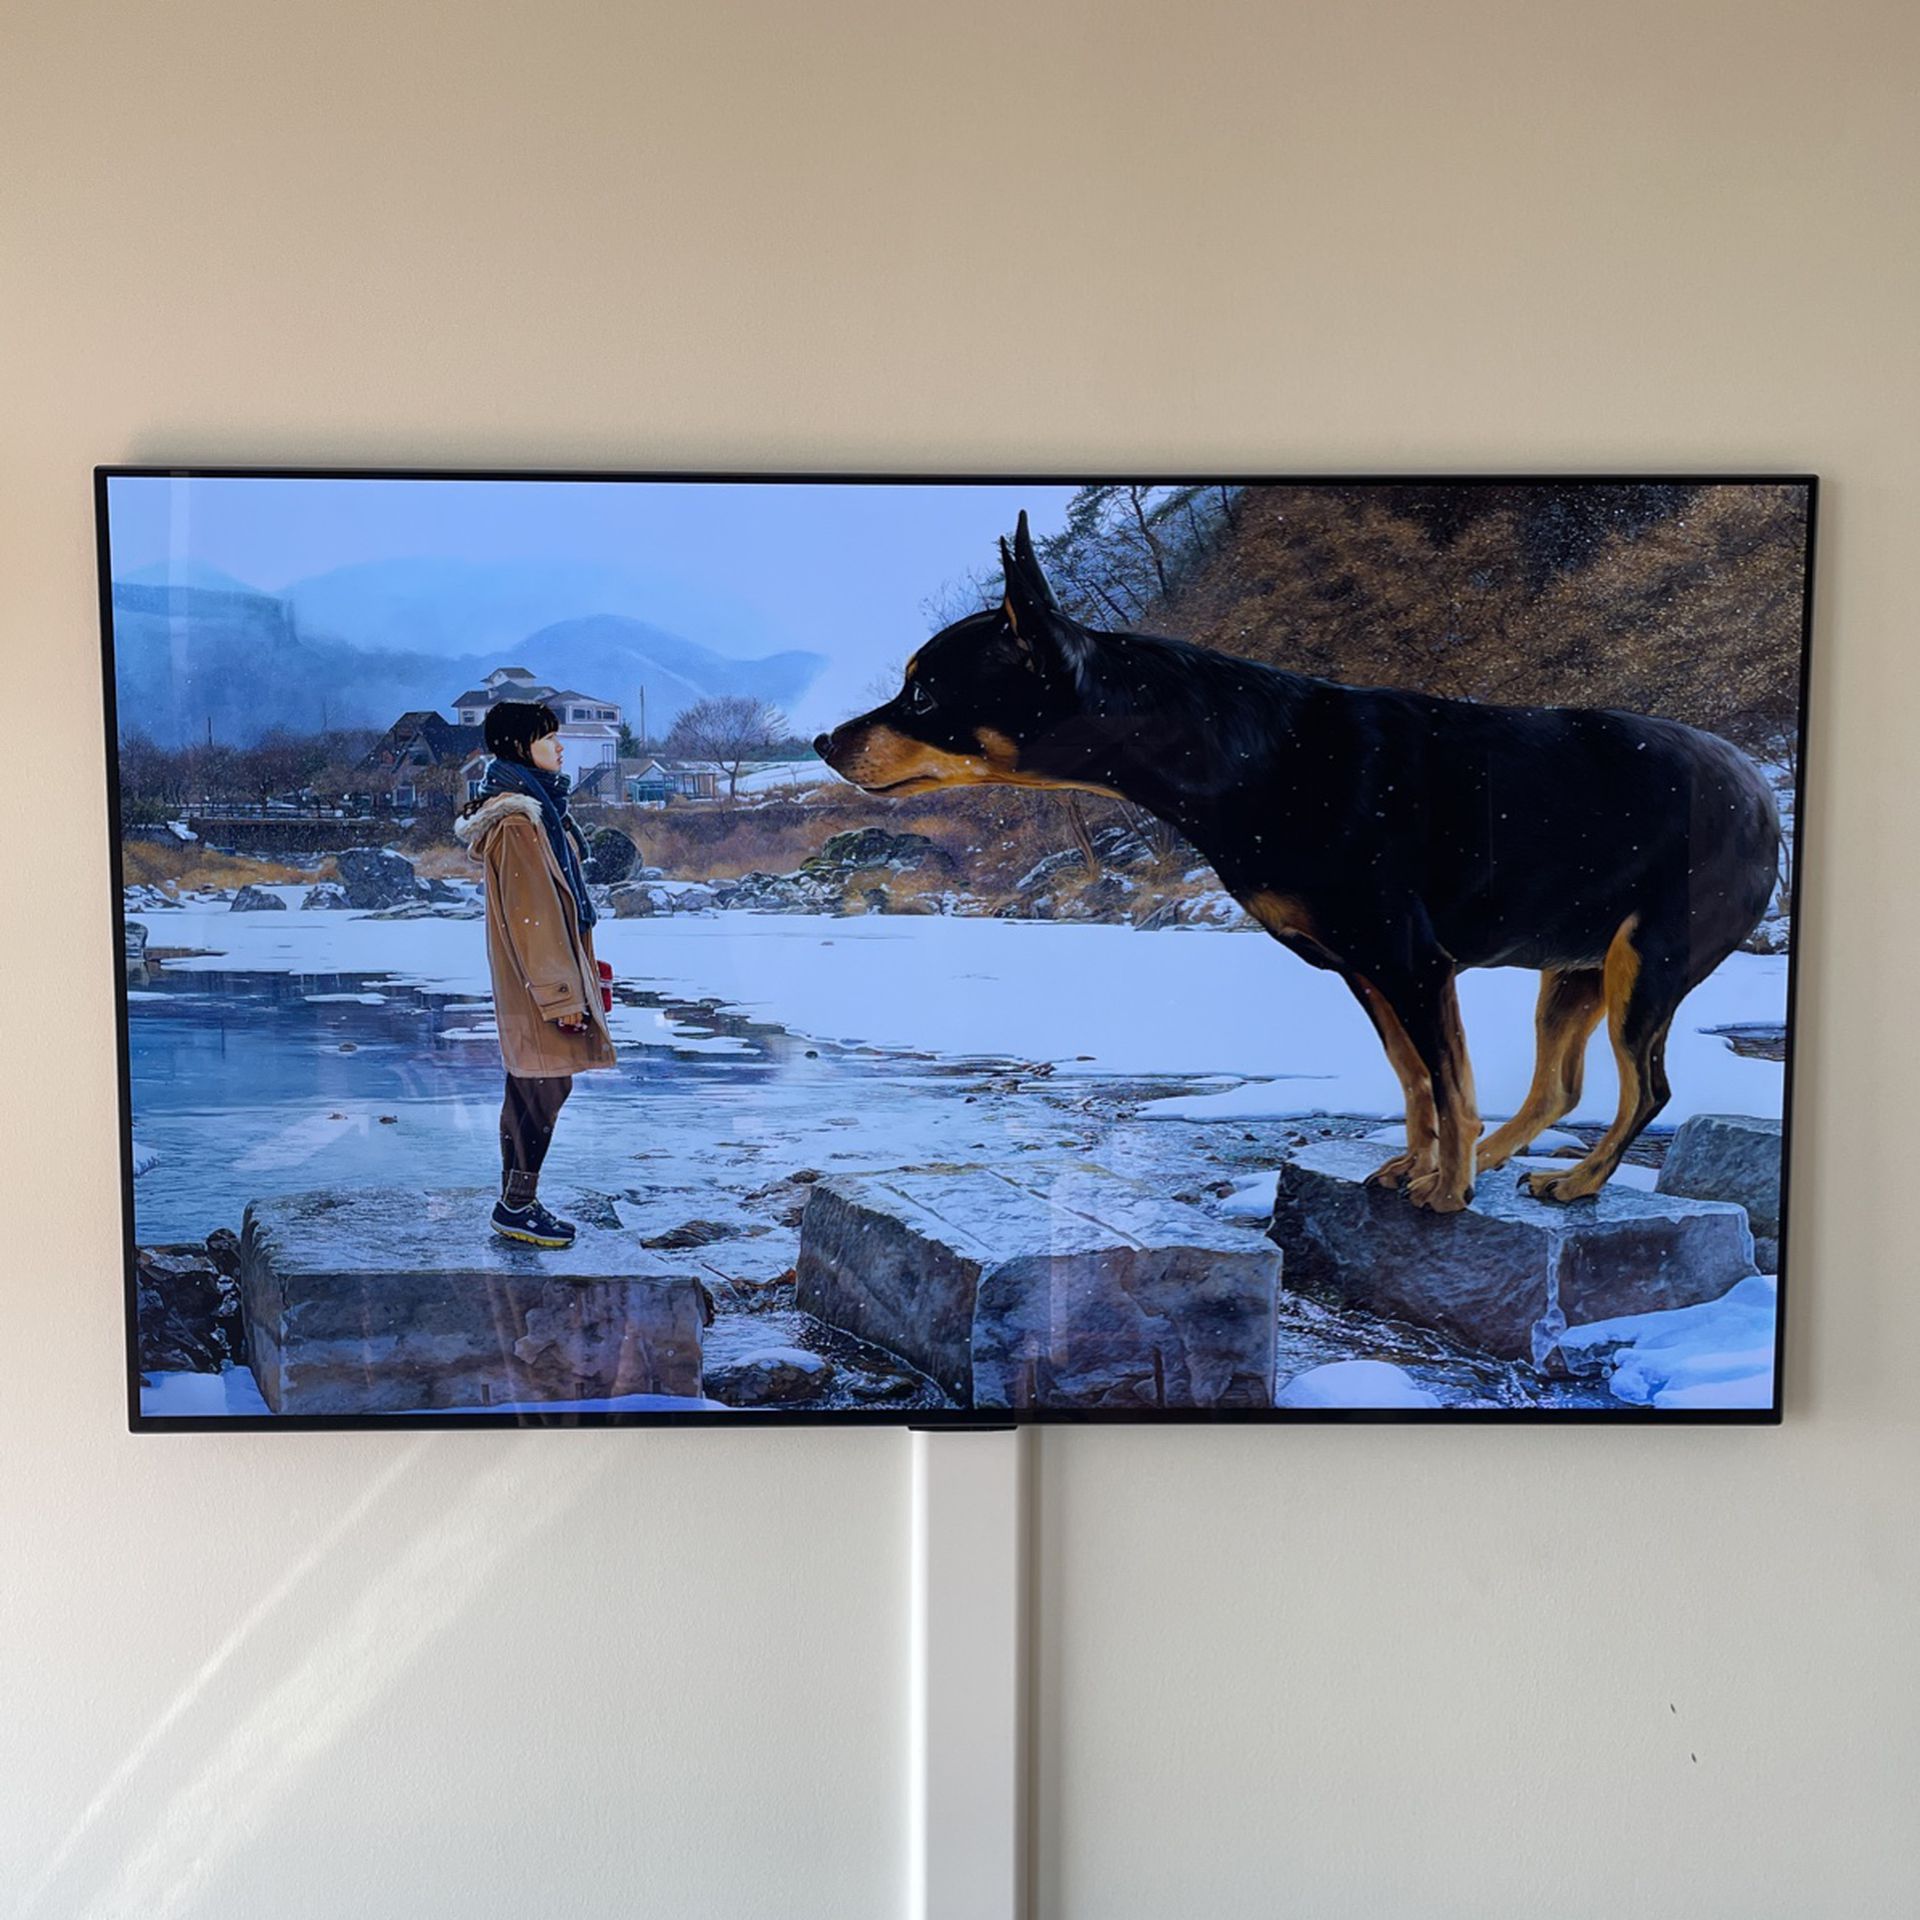 55” LG G1 Gallery TV - Mount Included 